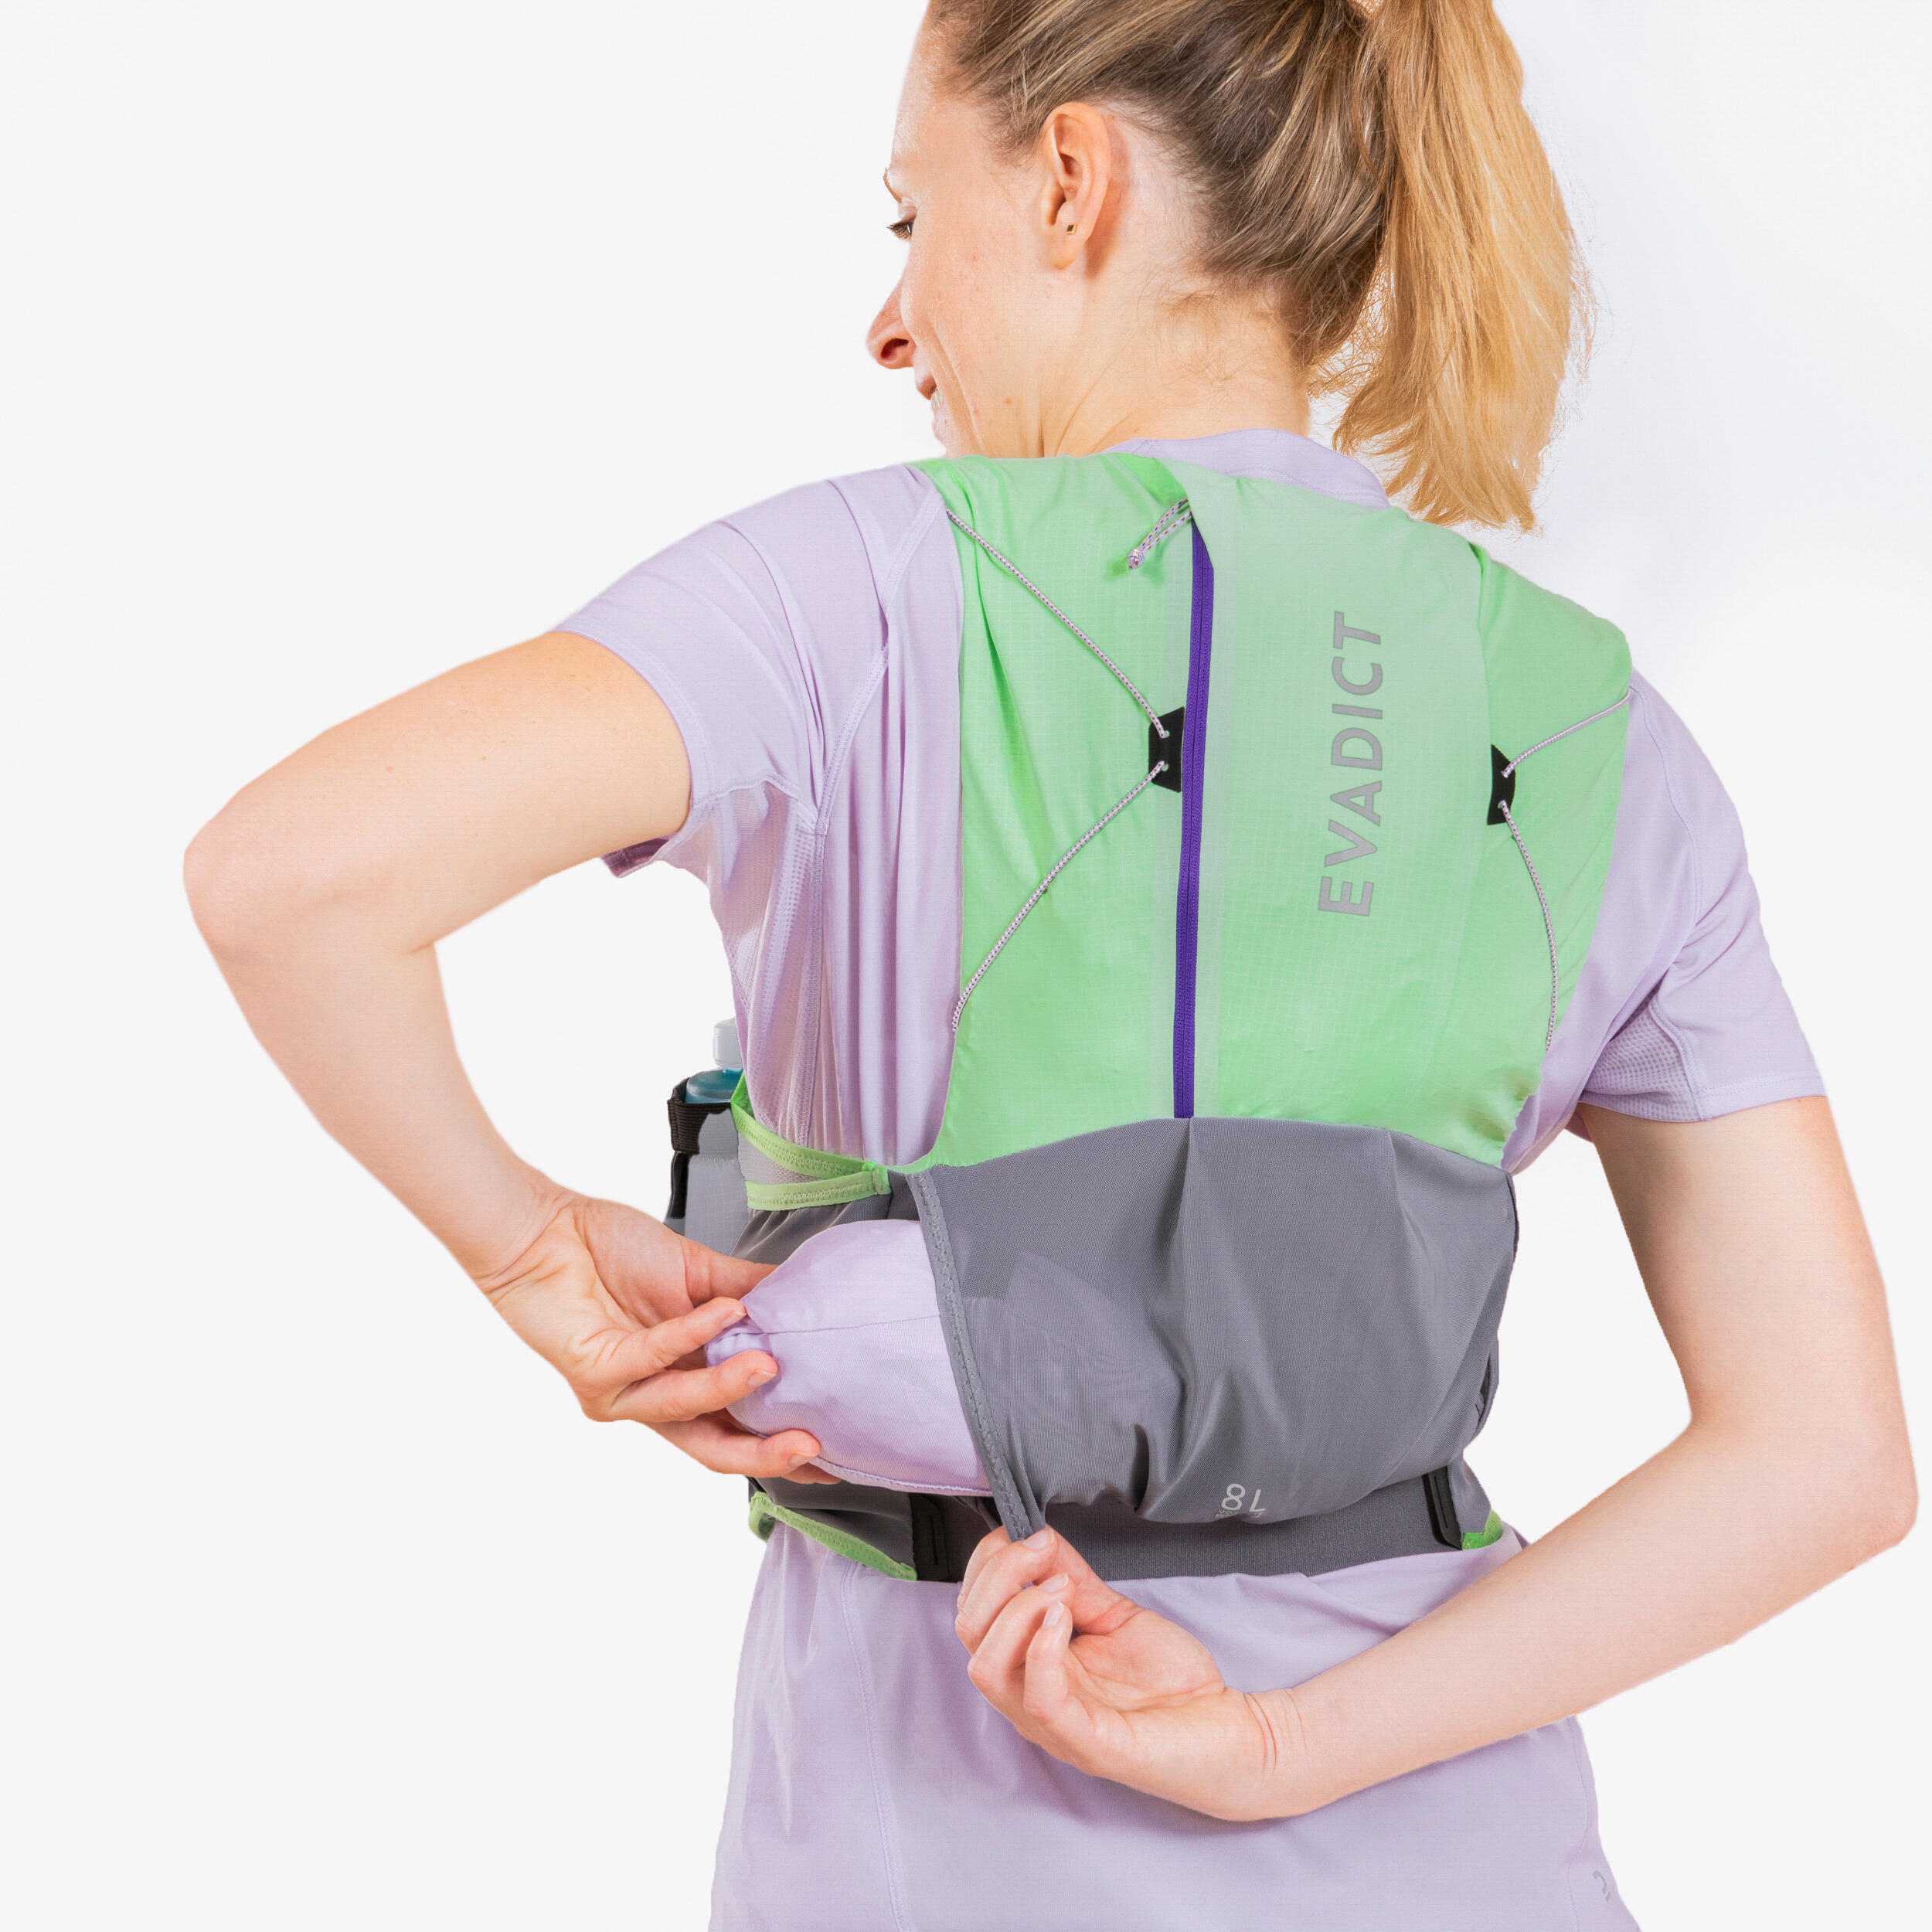 8L WOMEN'S TRAIL RUNNING BAG - MINT GREEN - SOLD WITH 2 500ML FLASKS 5/9